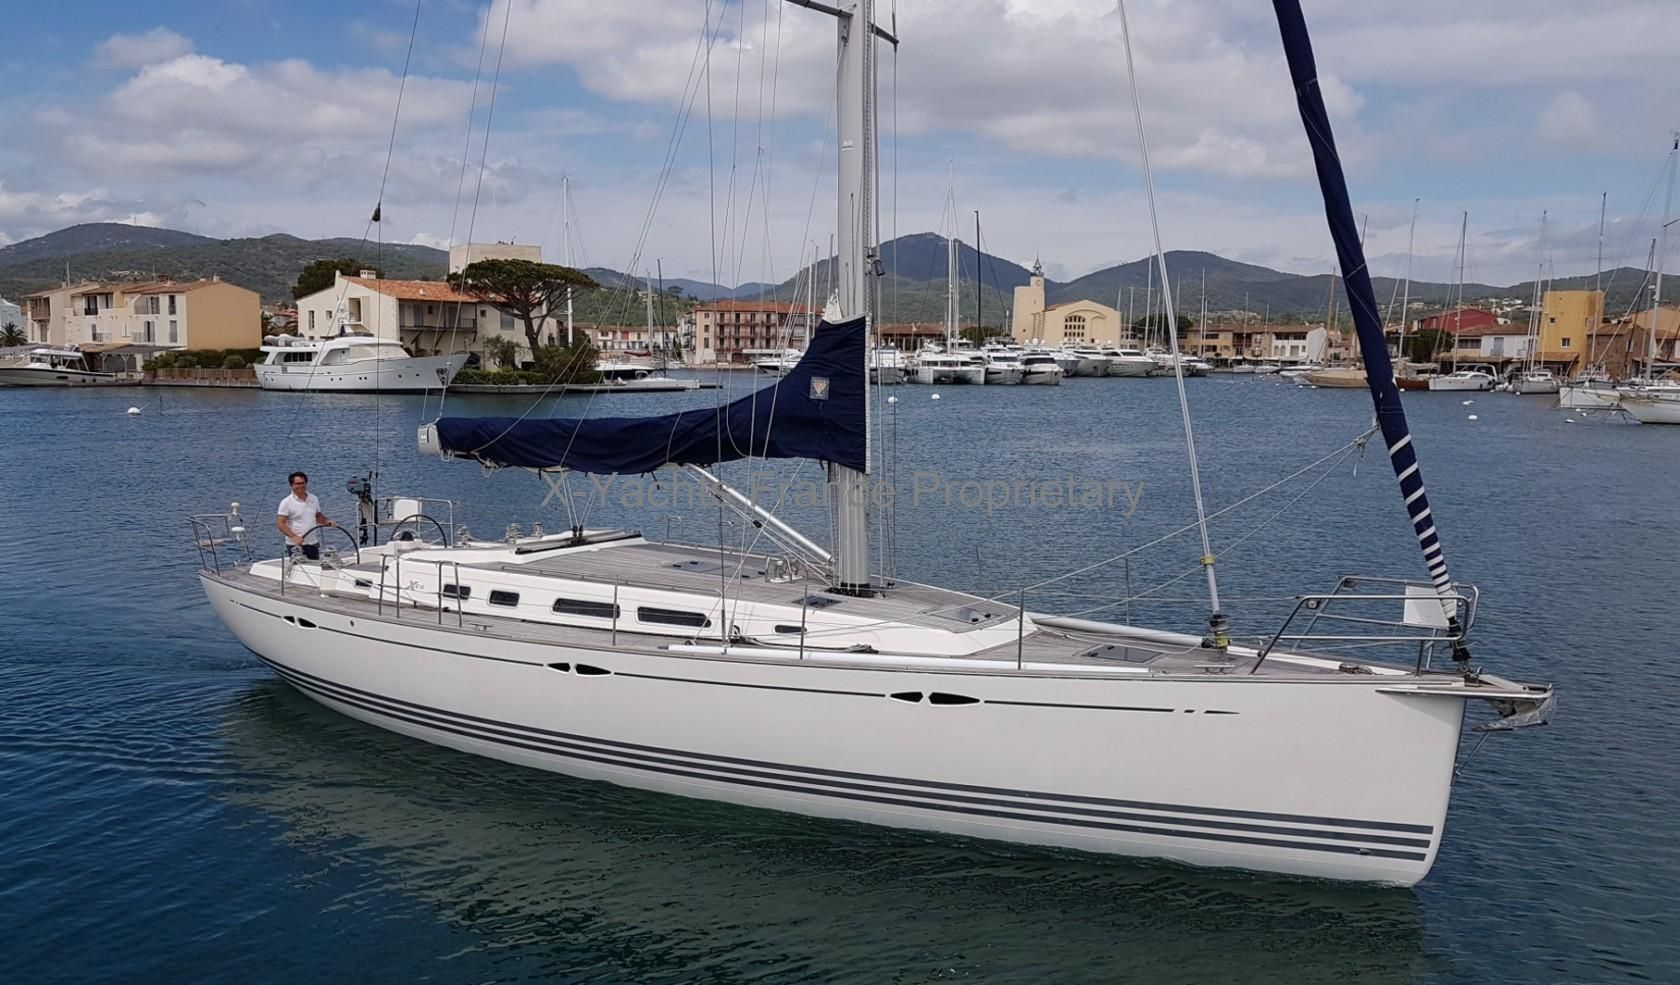 x 45 yacht for sale